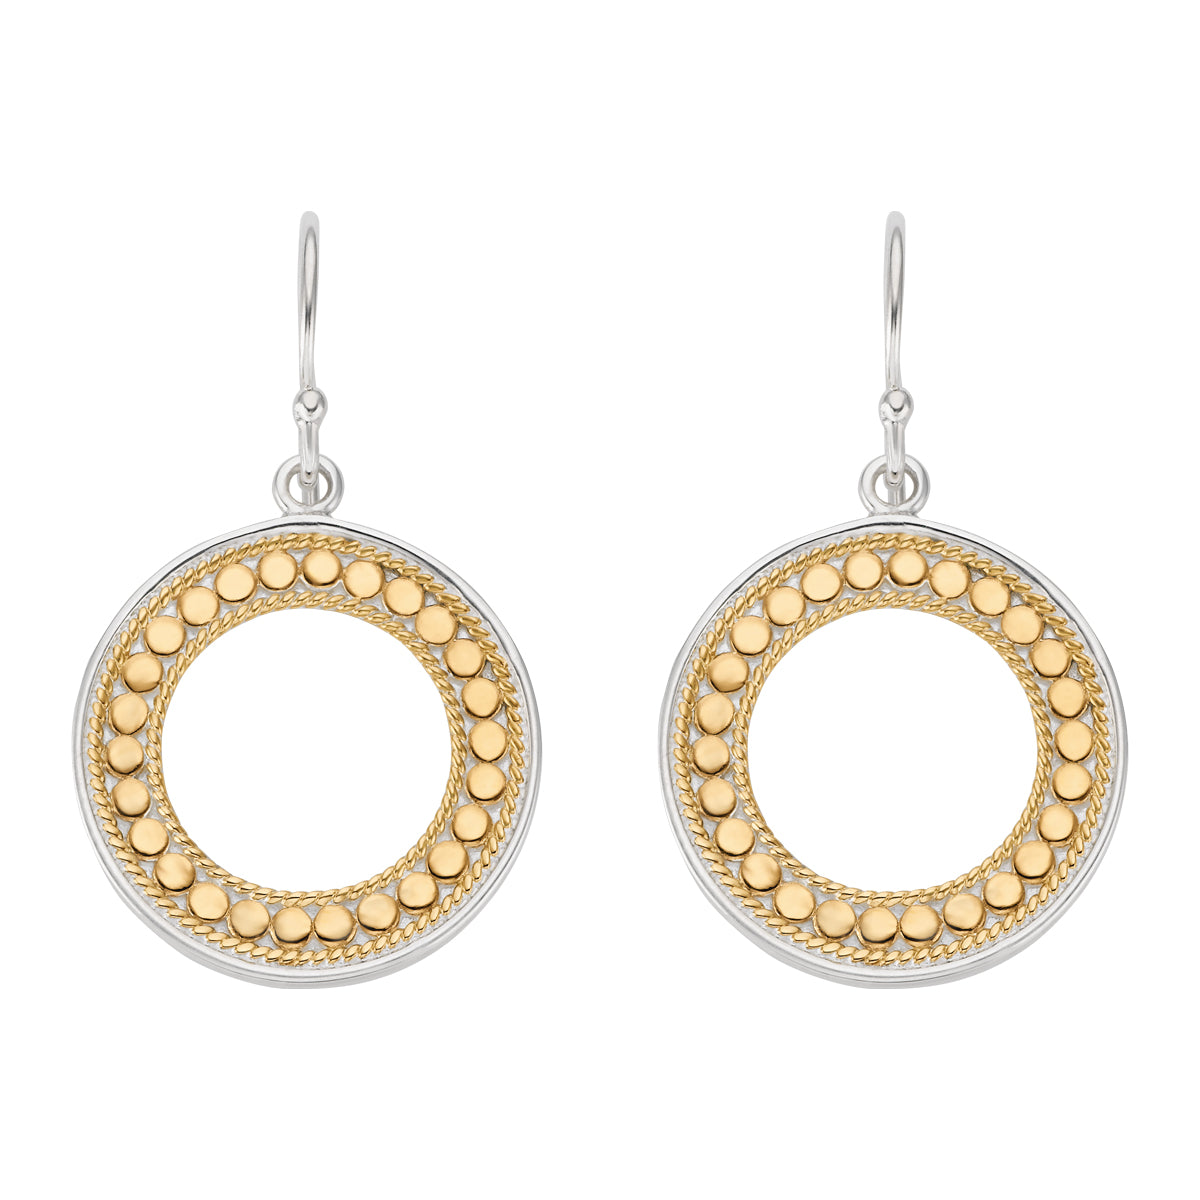 Ana Beck 18k gold plated and sterling silver Open Circle Drop Earrings - Gold